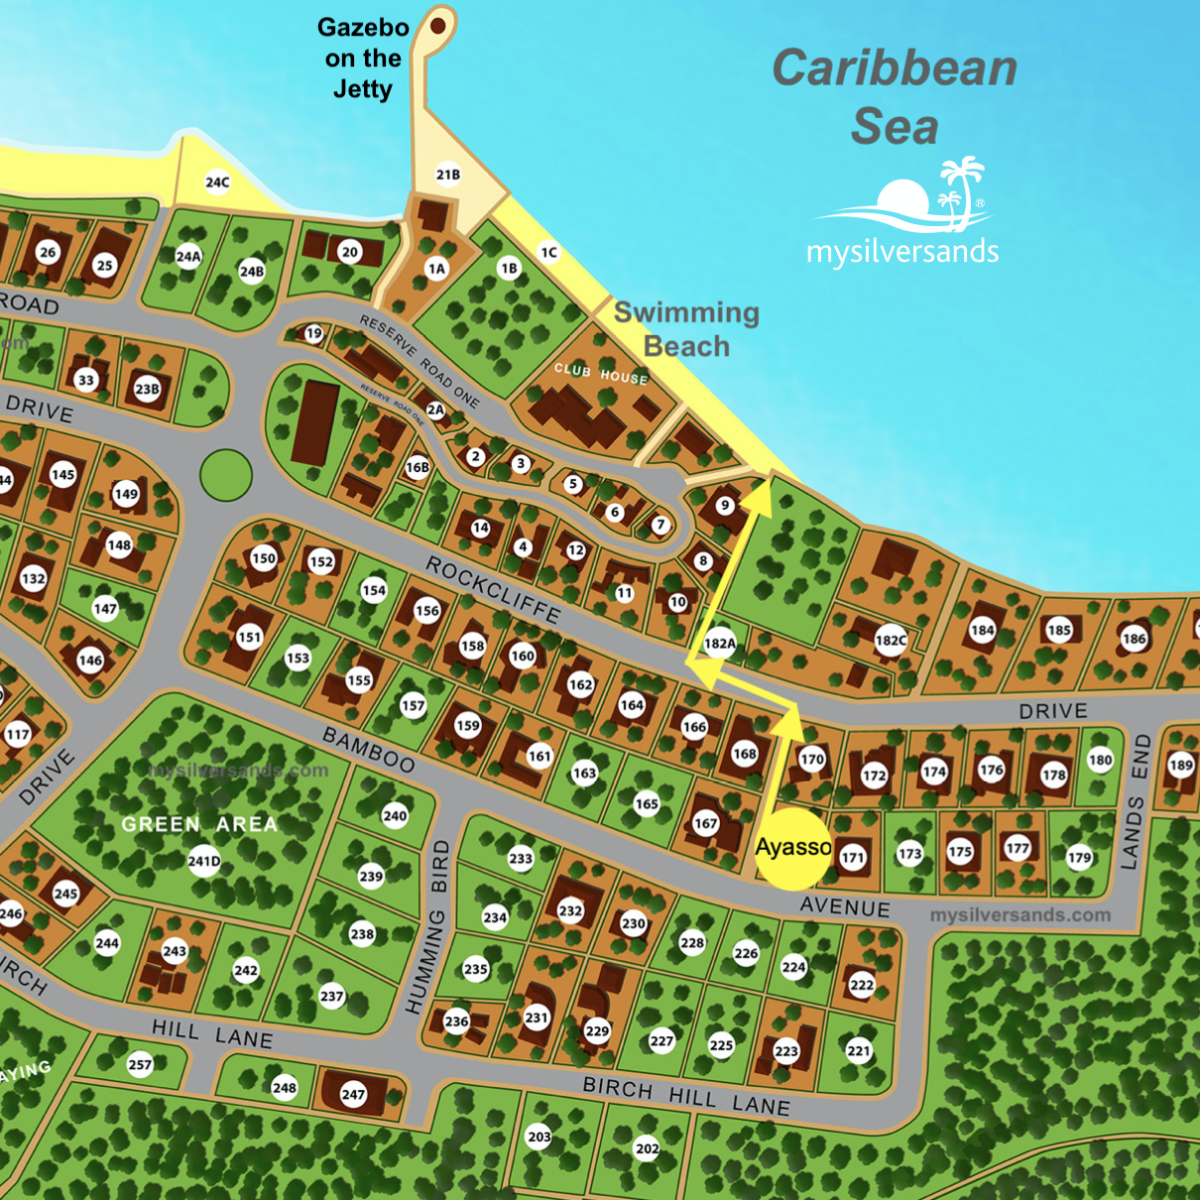 map of silver sands showing ayasso location and how to get to the beach